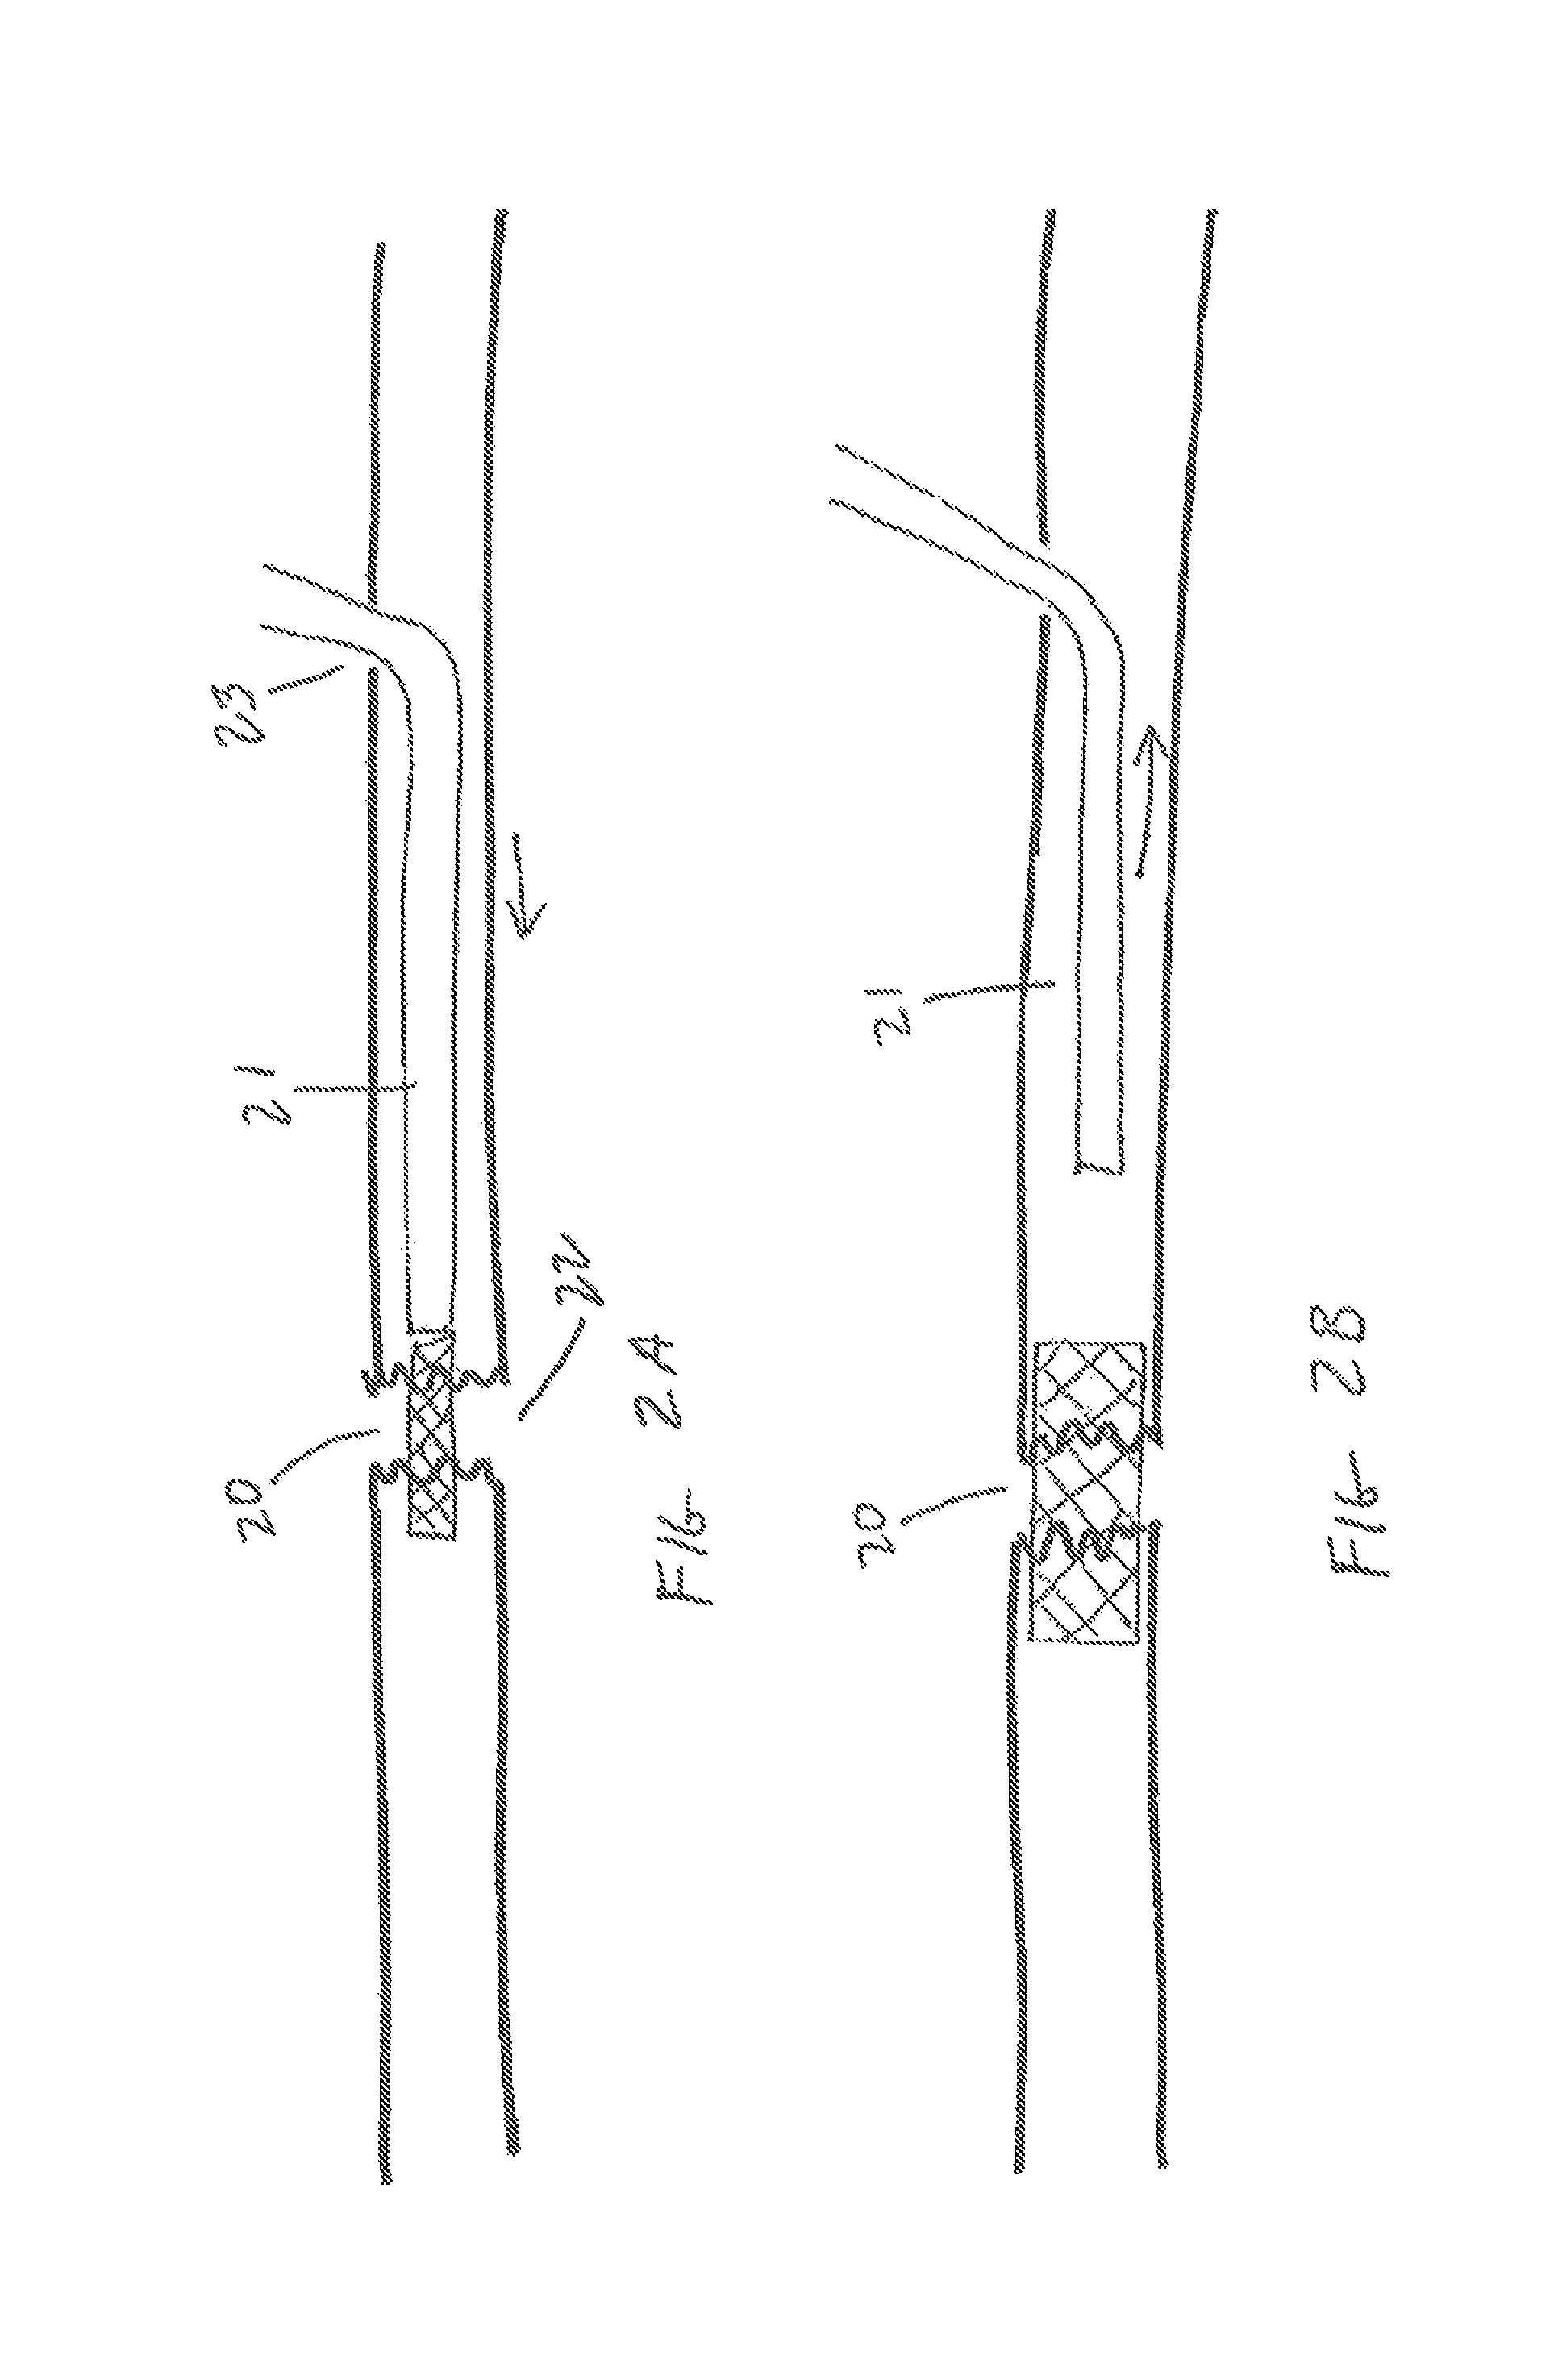 Method and devices for the treatment of nasal sinus disorders